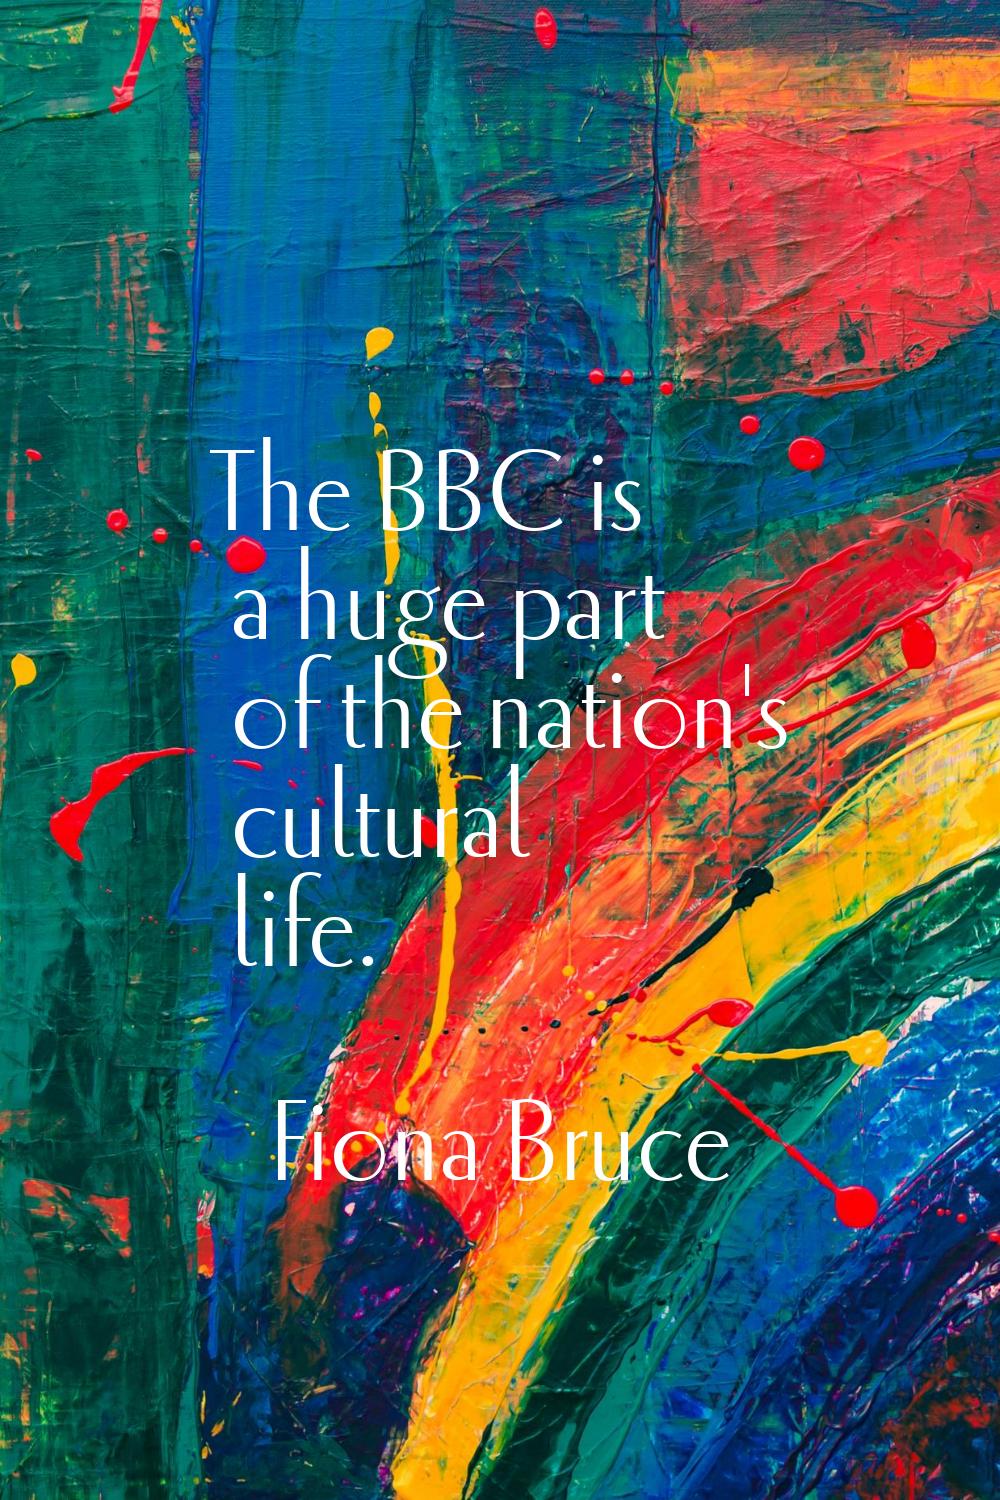 The BBC is a huge part of the nation's cultural life.